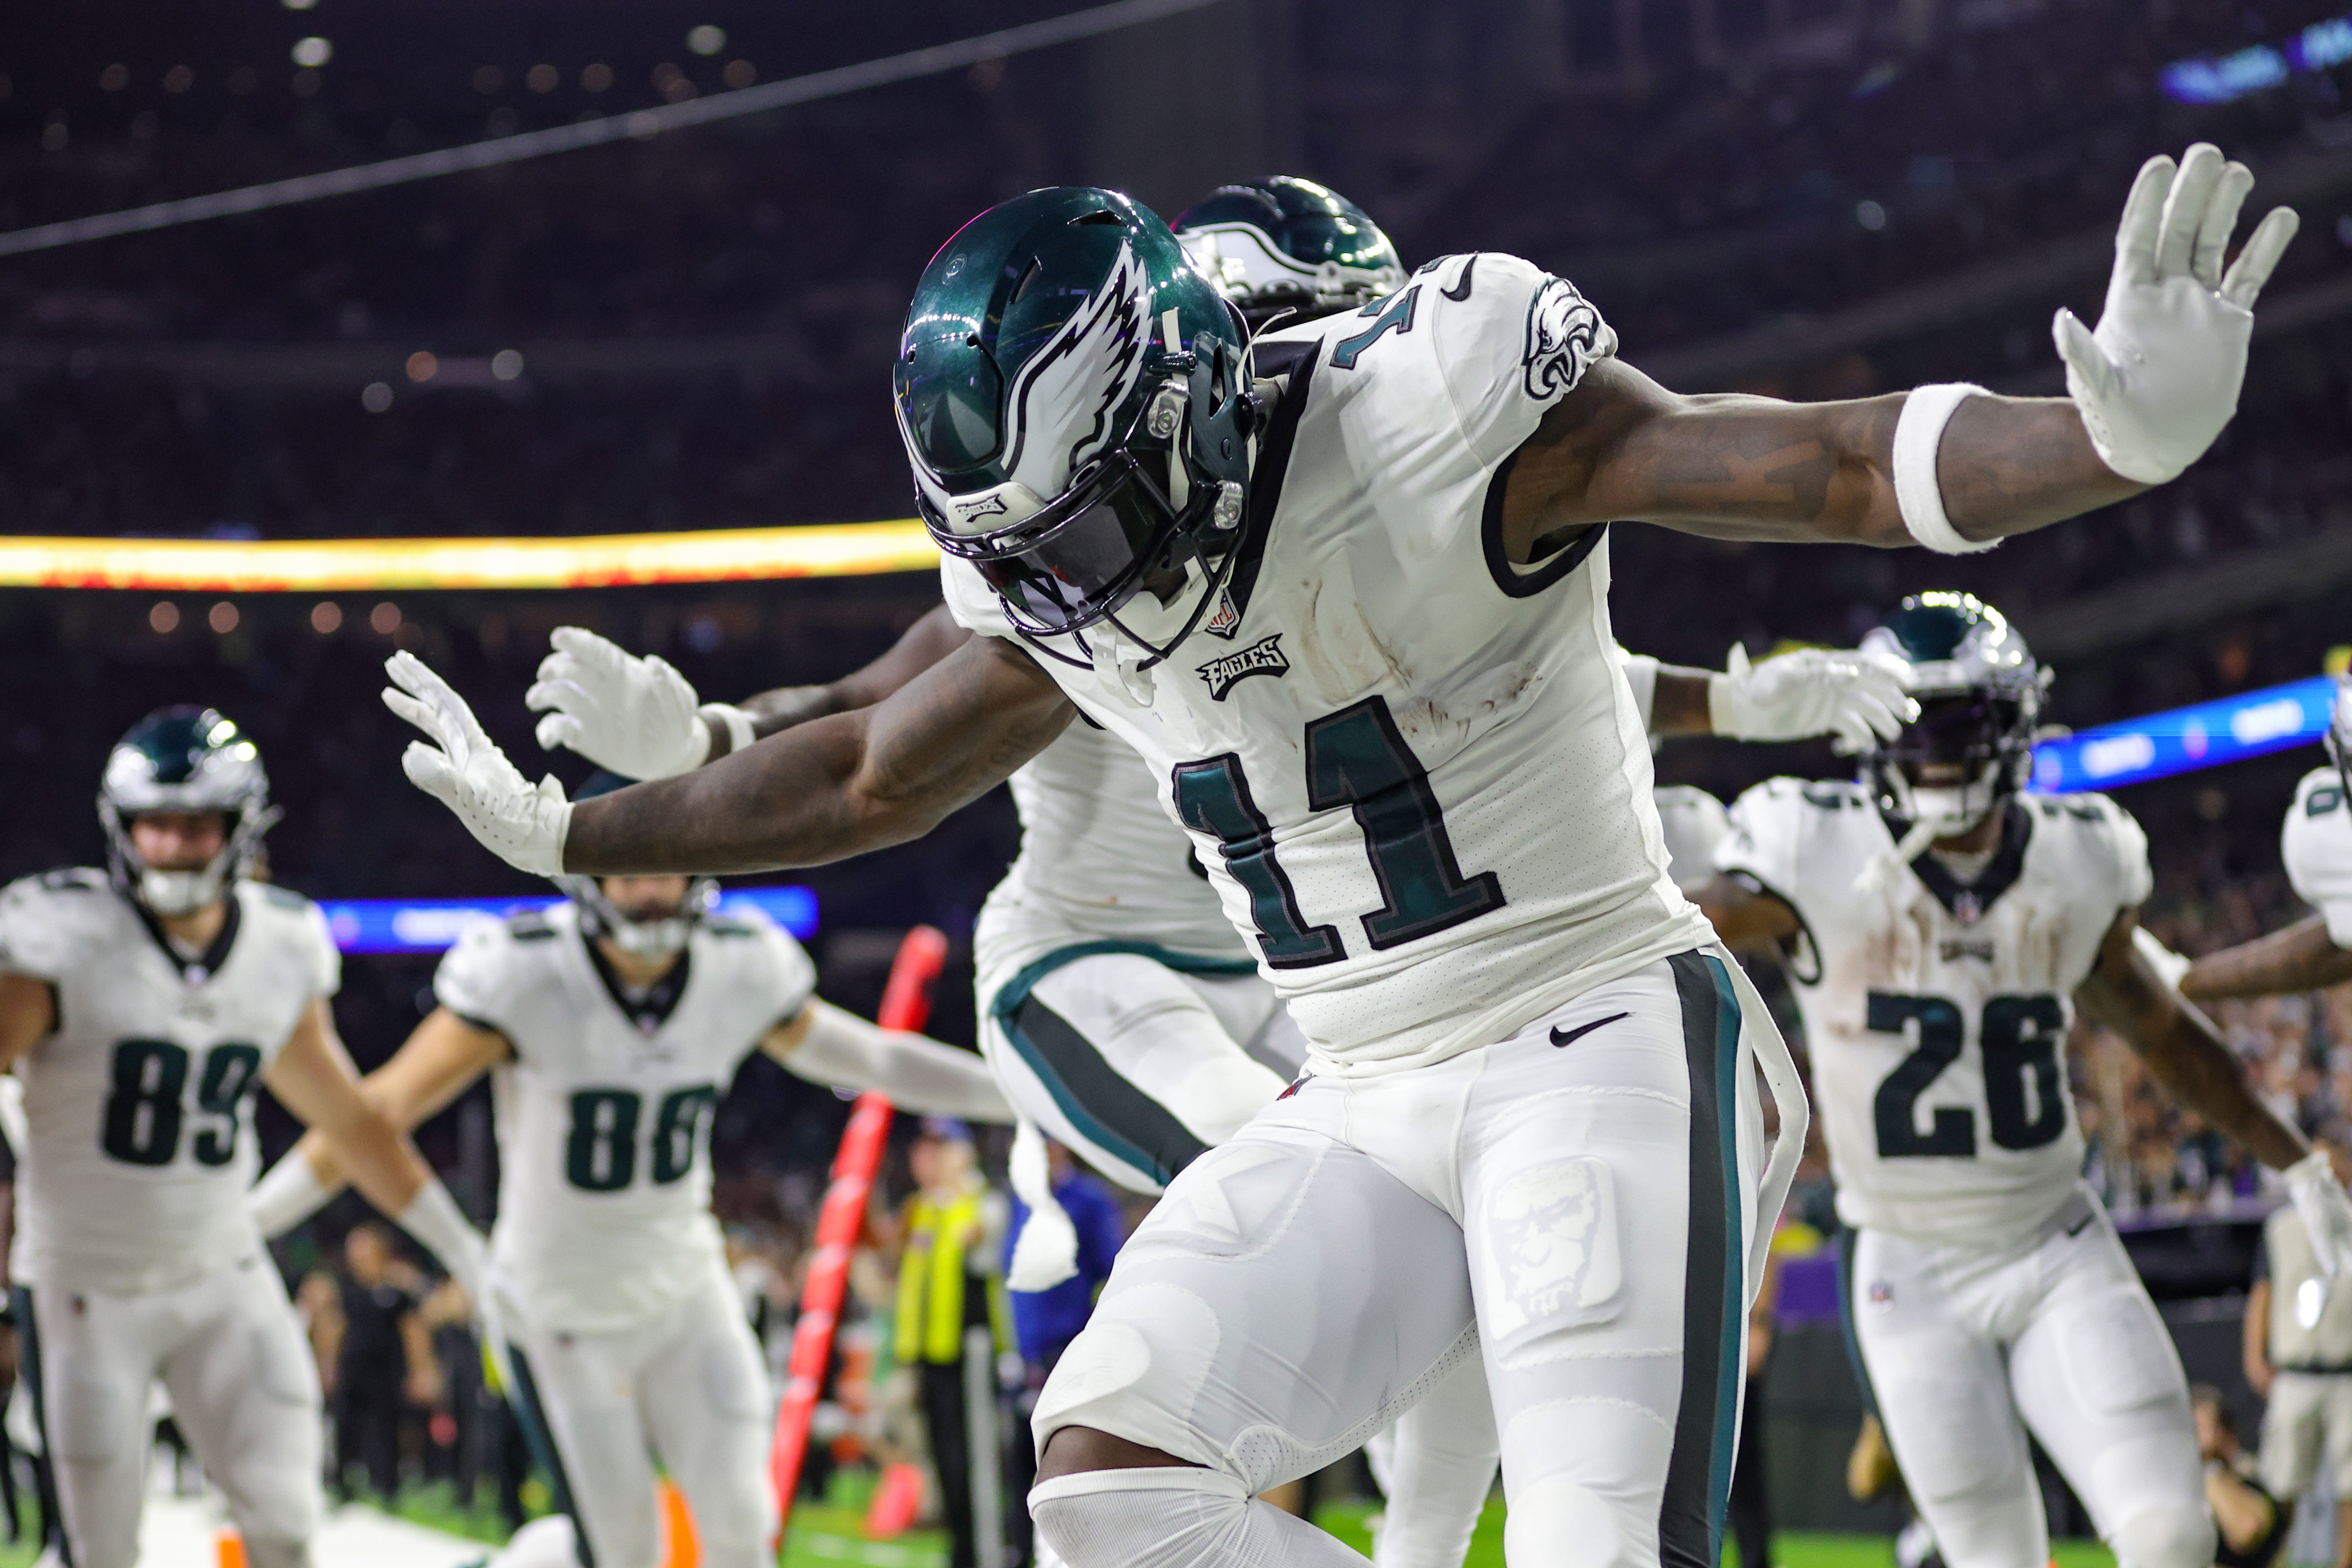 NFL Week 16 Saturday Schedule: Eagles and Cowboys battle with NFC